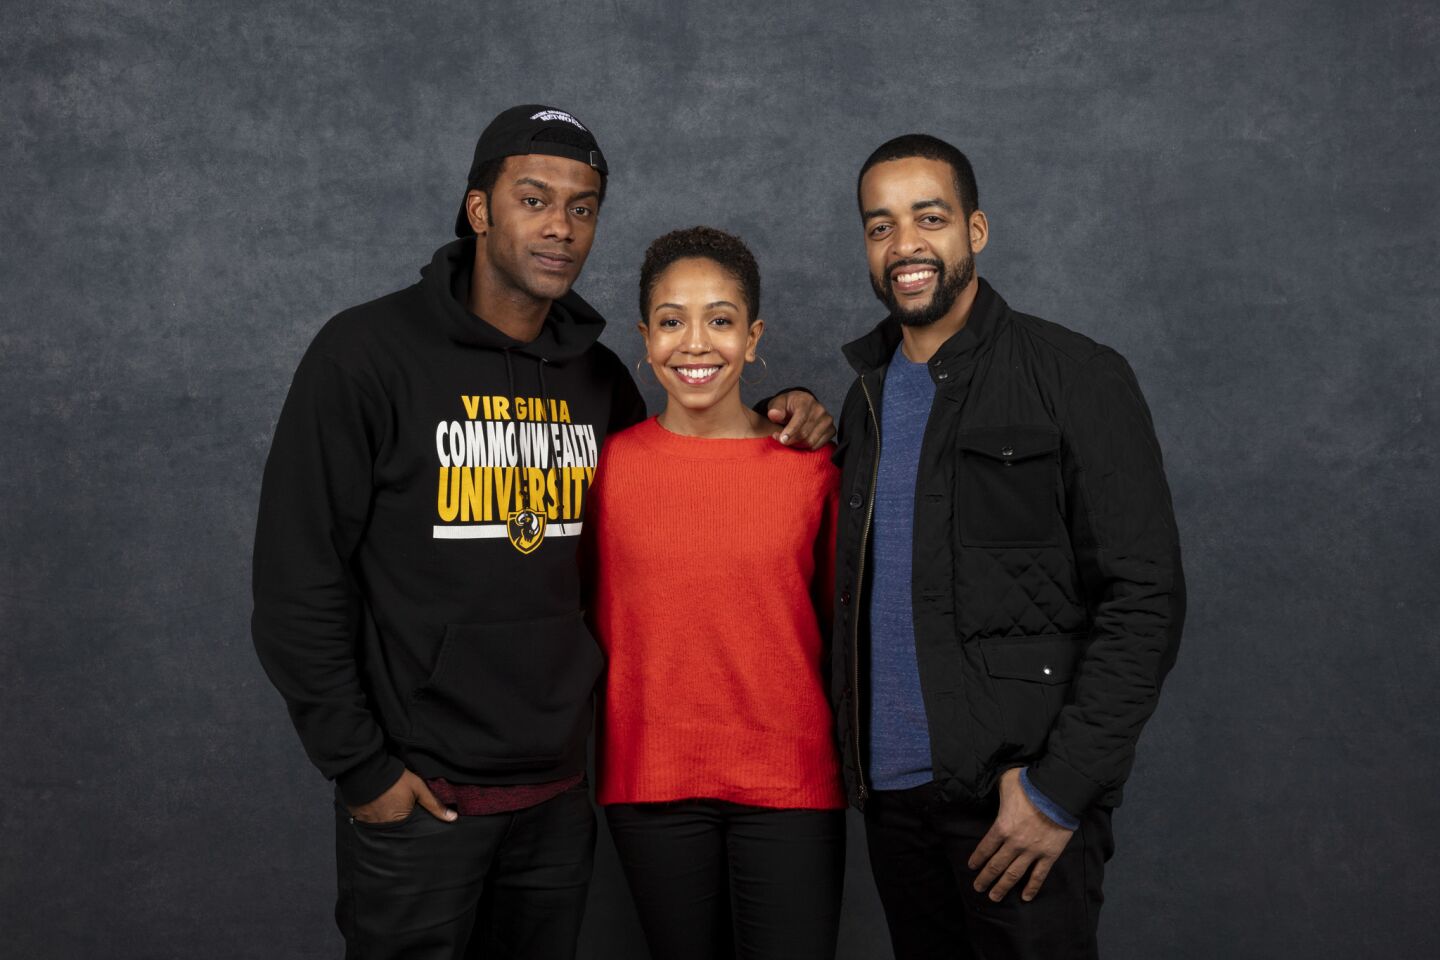 Actor Joshua Boone, actress/co-writer Zora Howard and director/co-writer Rashaad Ernesto Green, from the film "Premature."